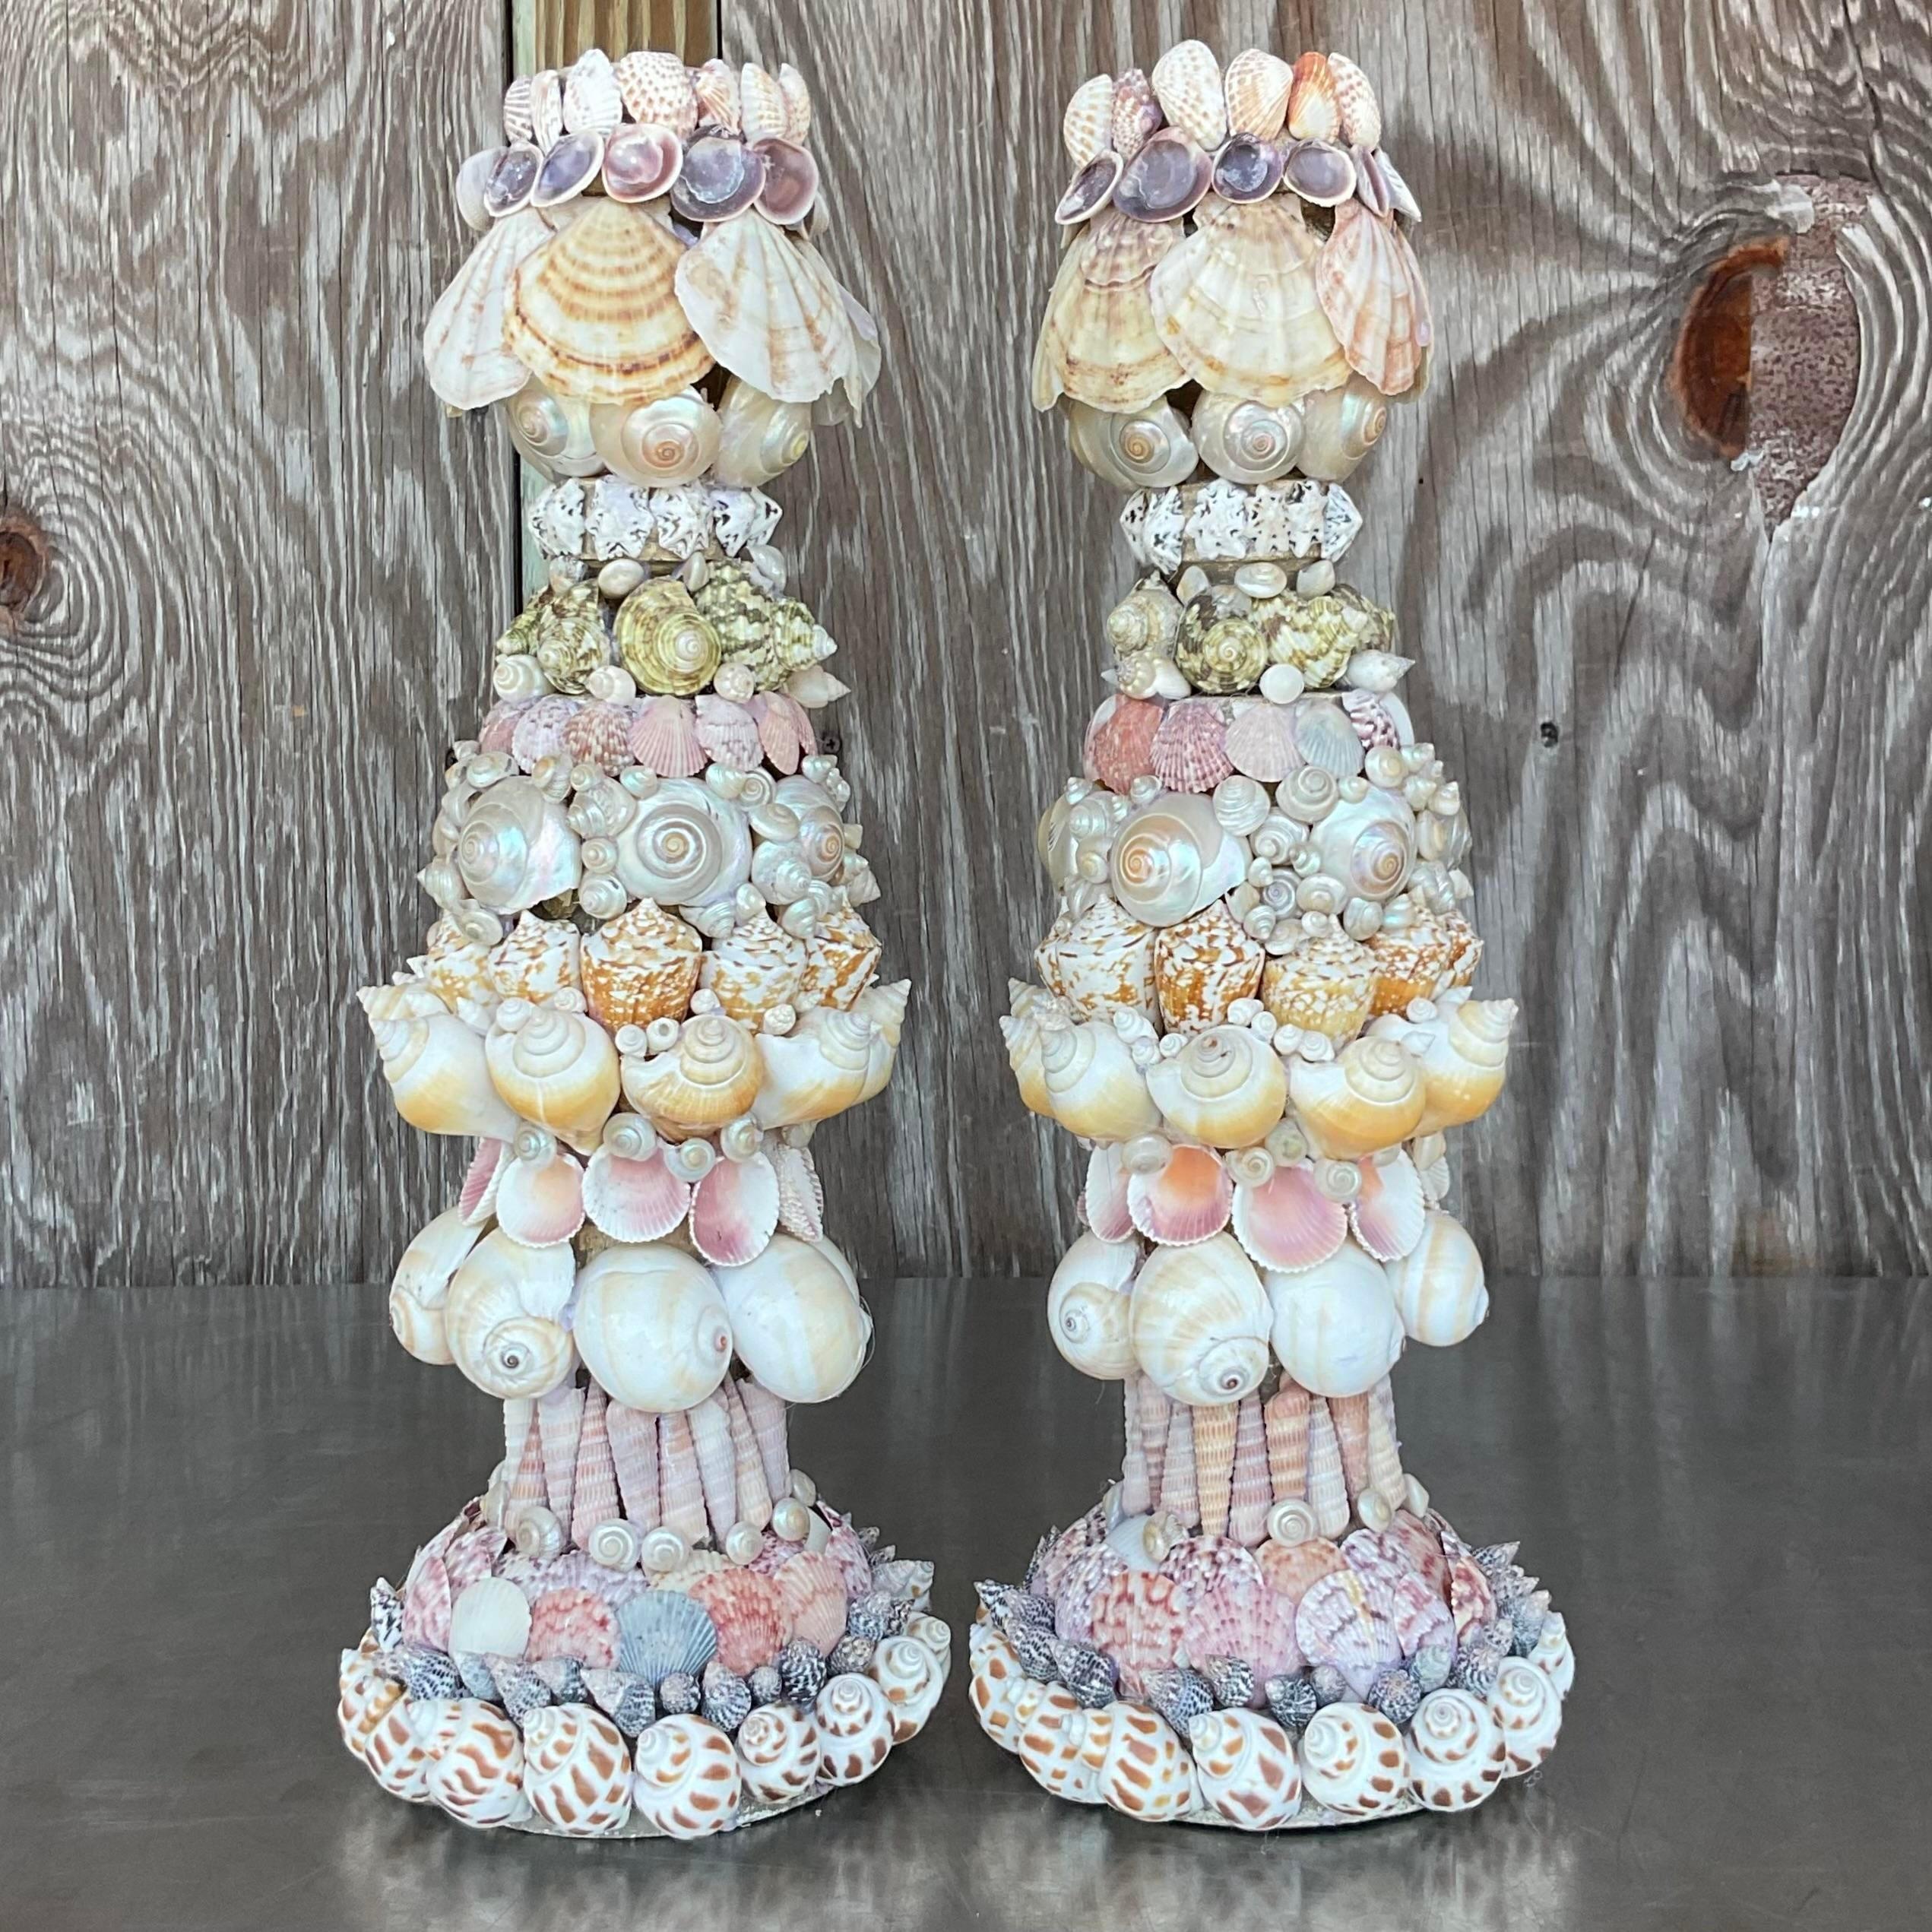 Vintage Coastal Shell Encrusted Candlesticks - a Pair For Sale 1